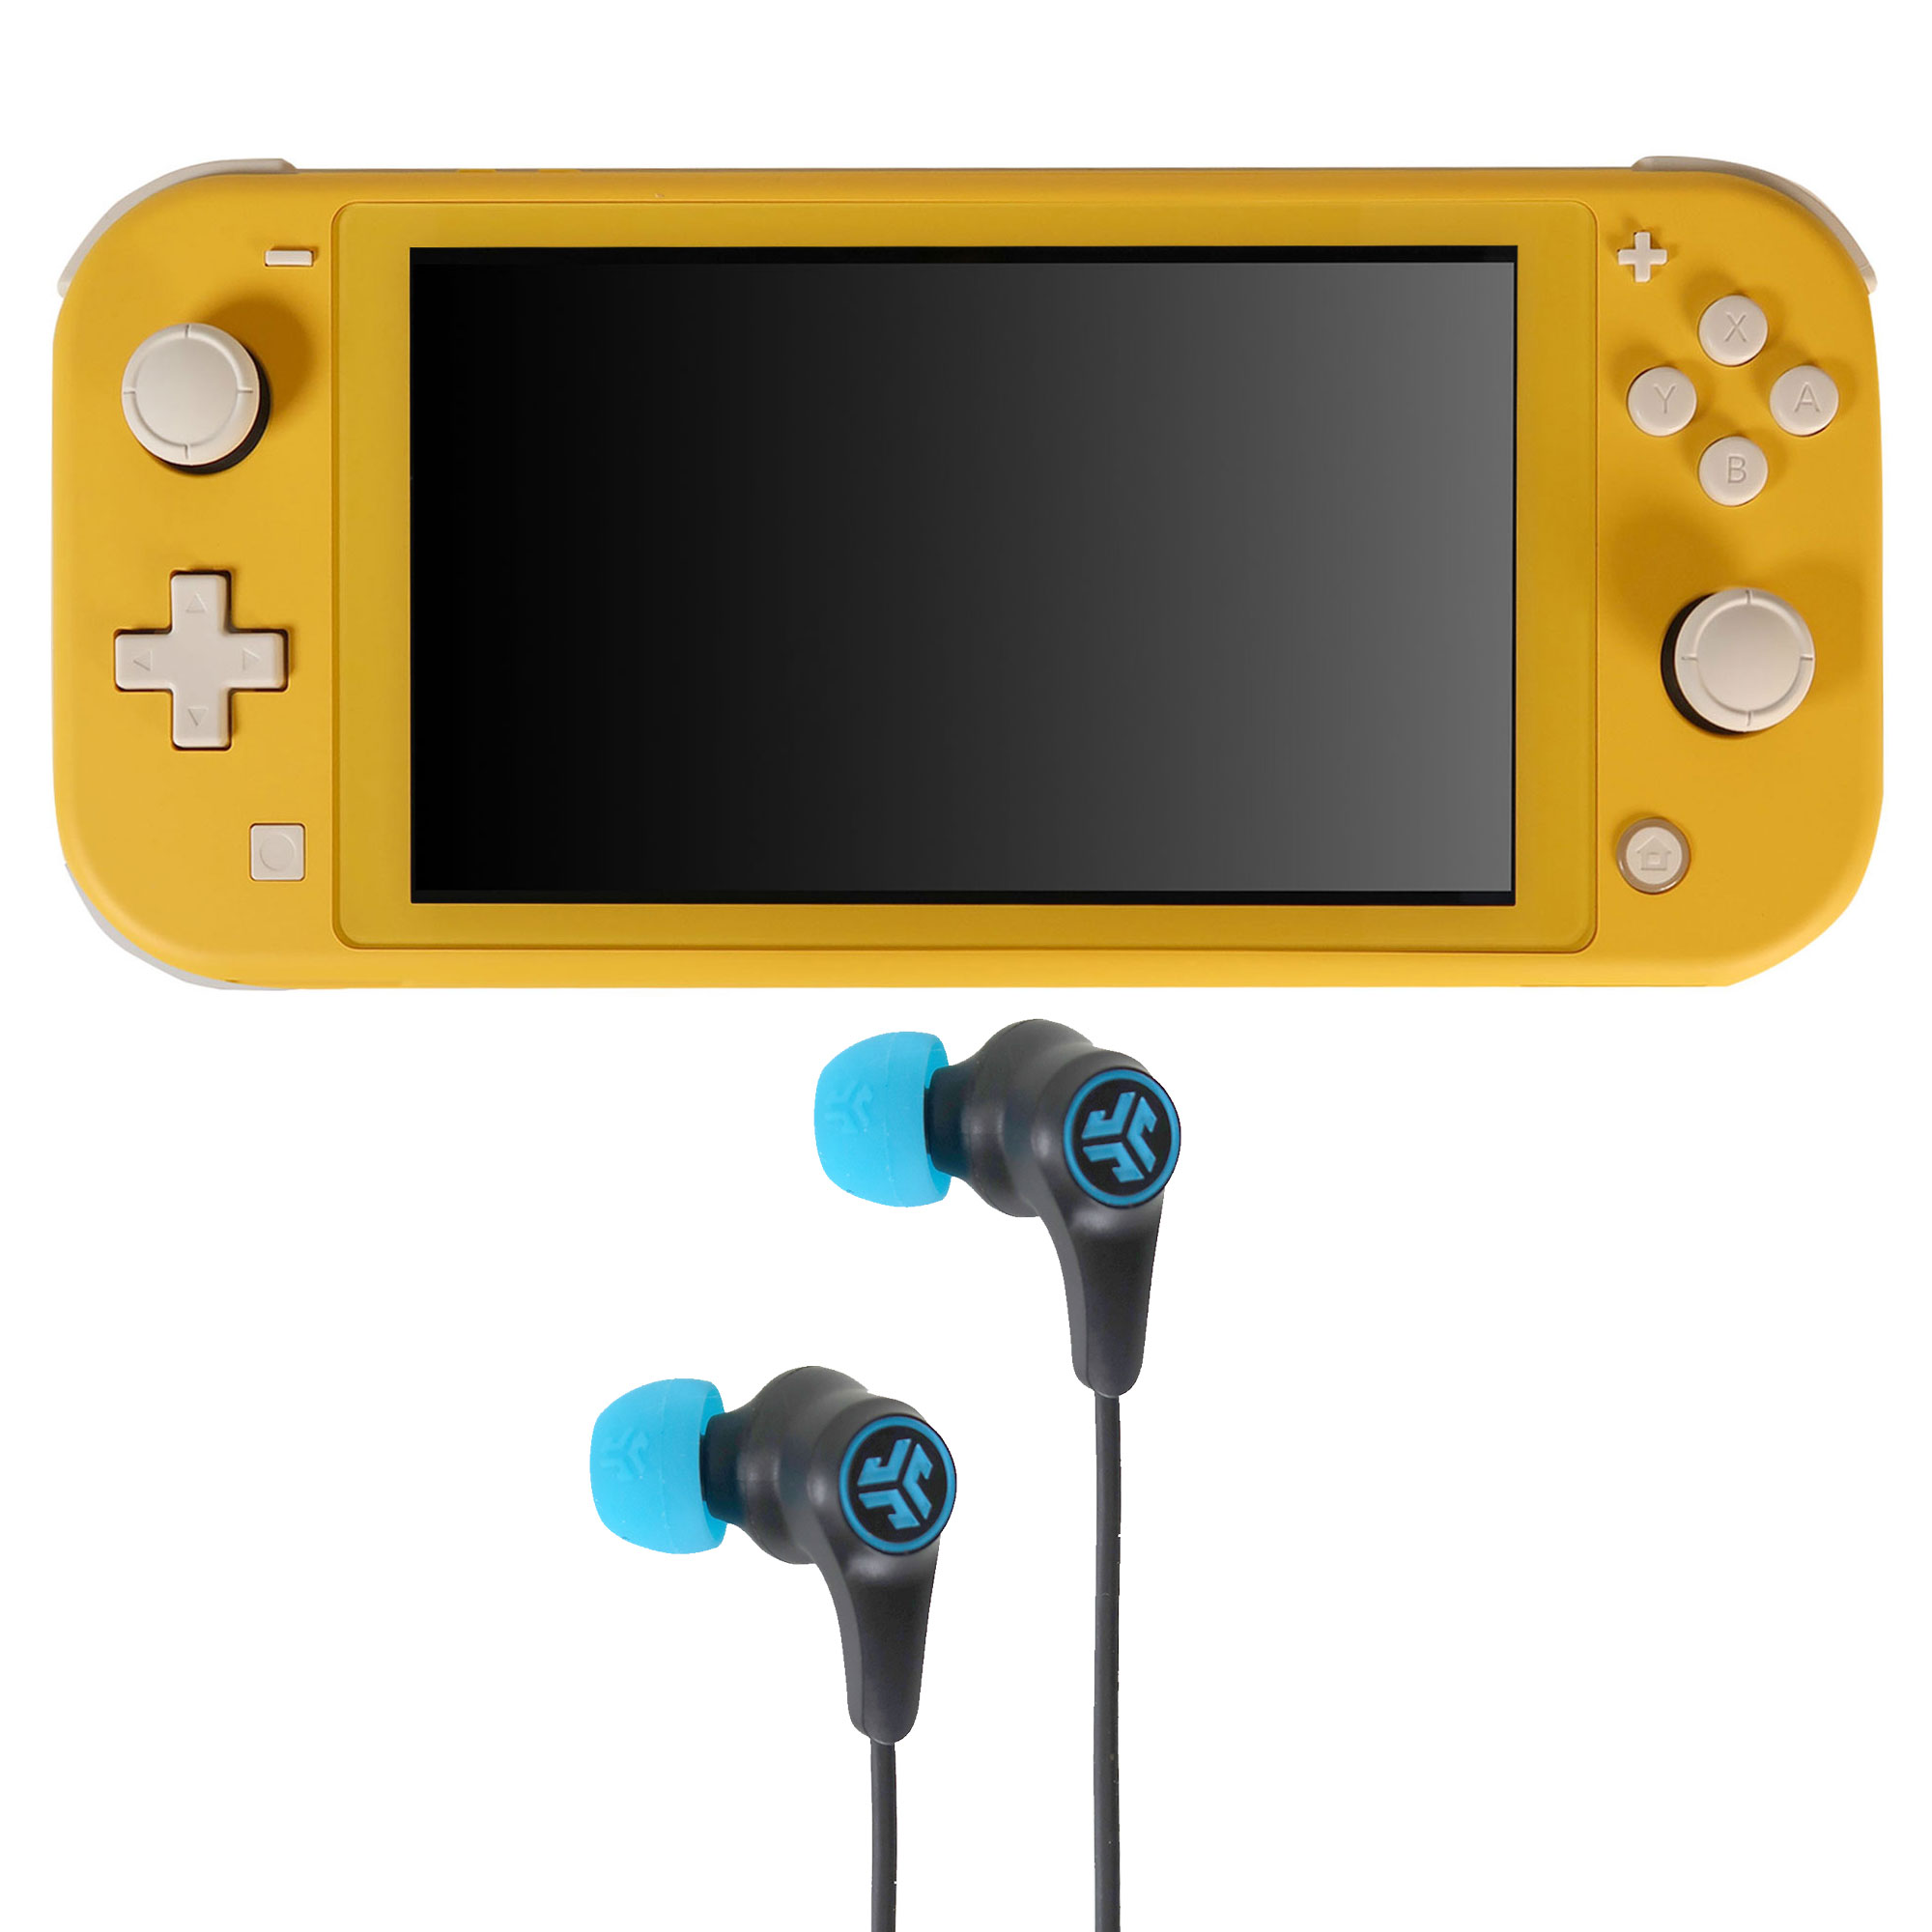 Nintendo Switch Lite (Yellow) with JLab Play Gaming Wireless Bluetooth Earbuds - Black/Blue